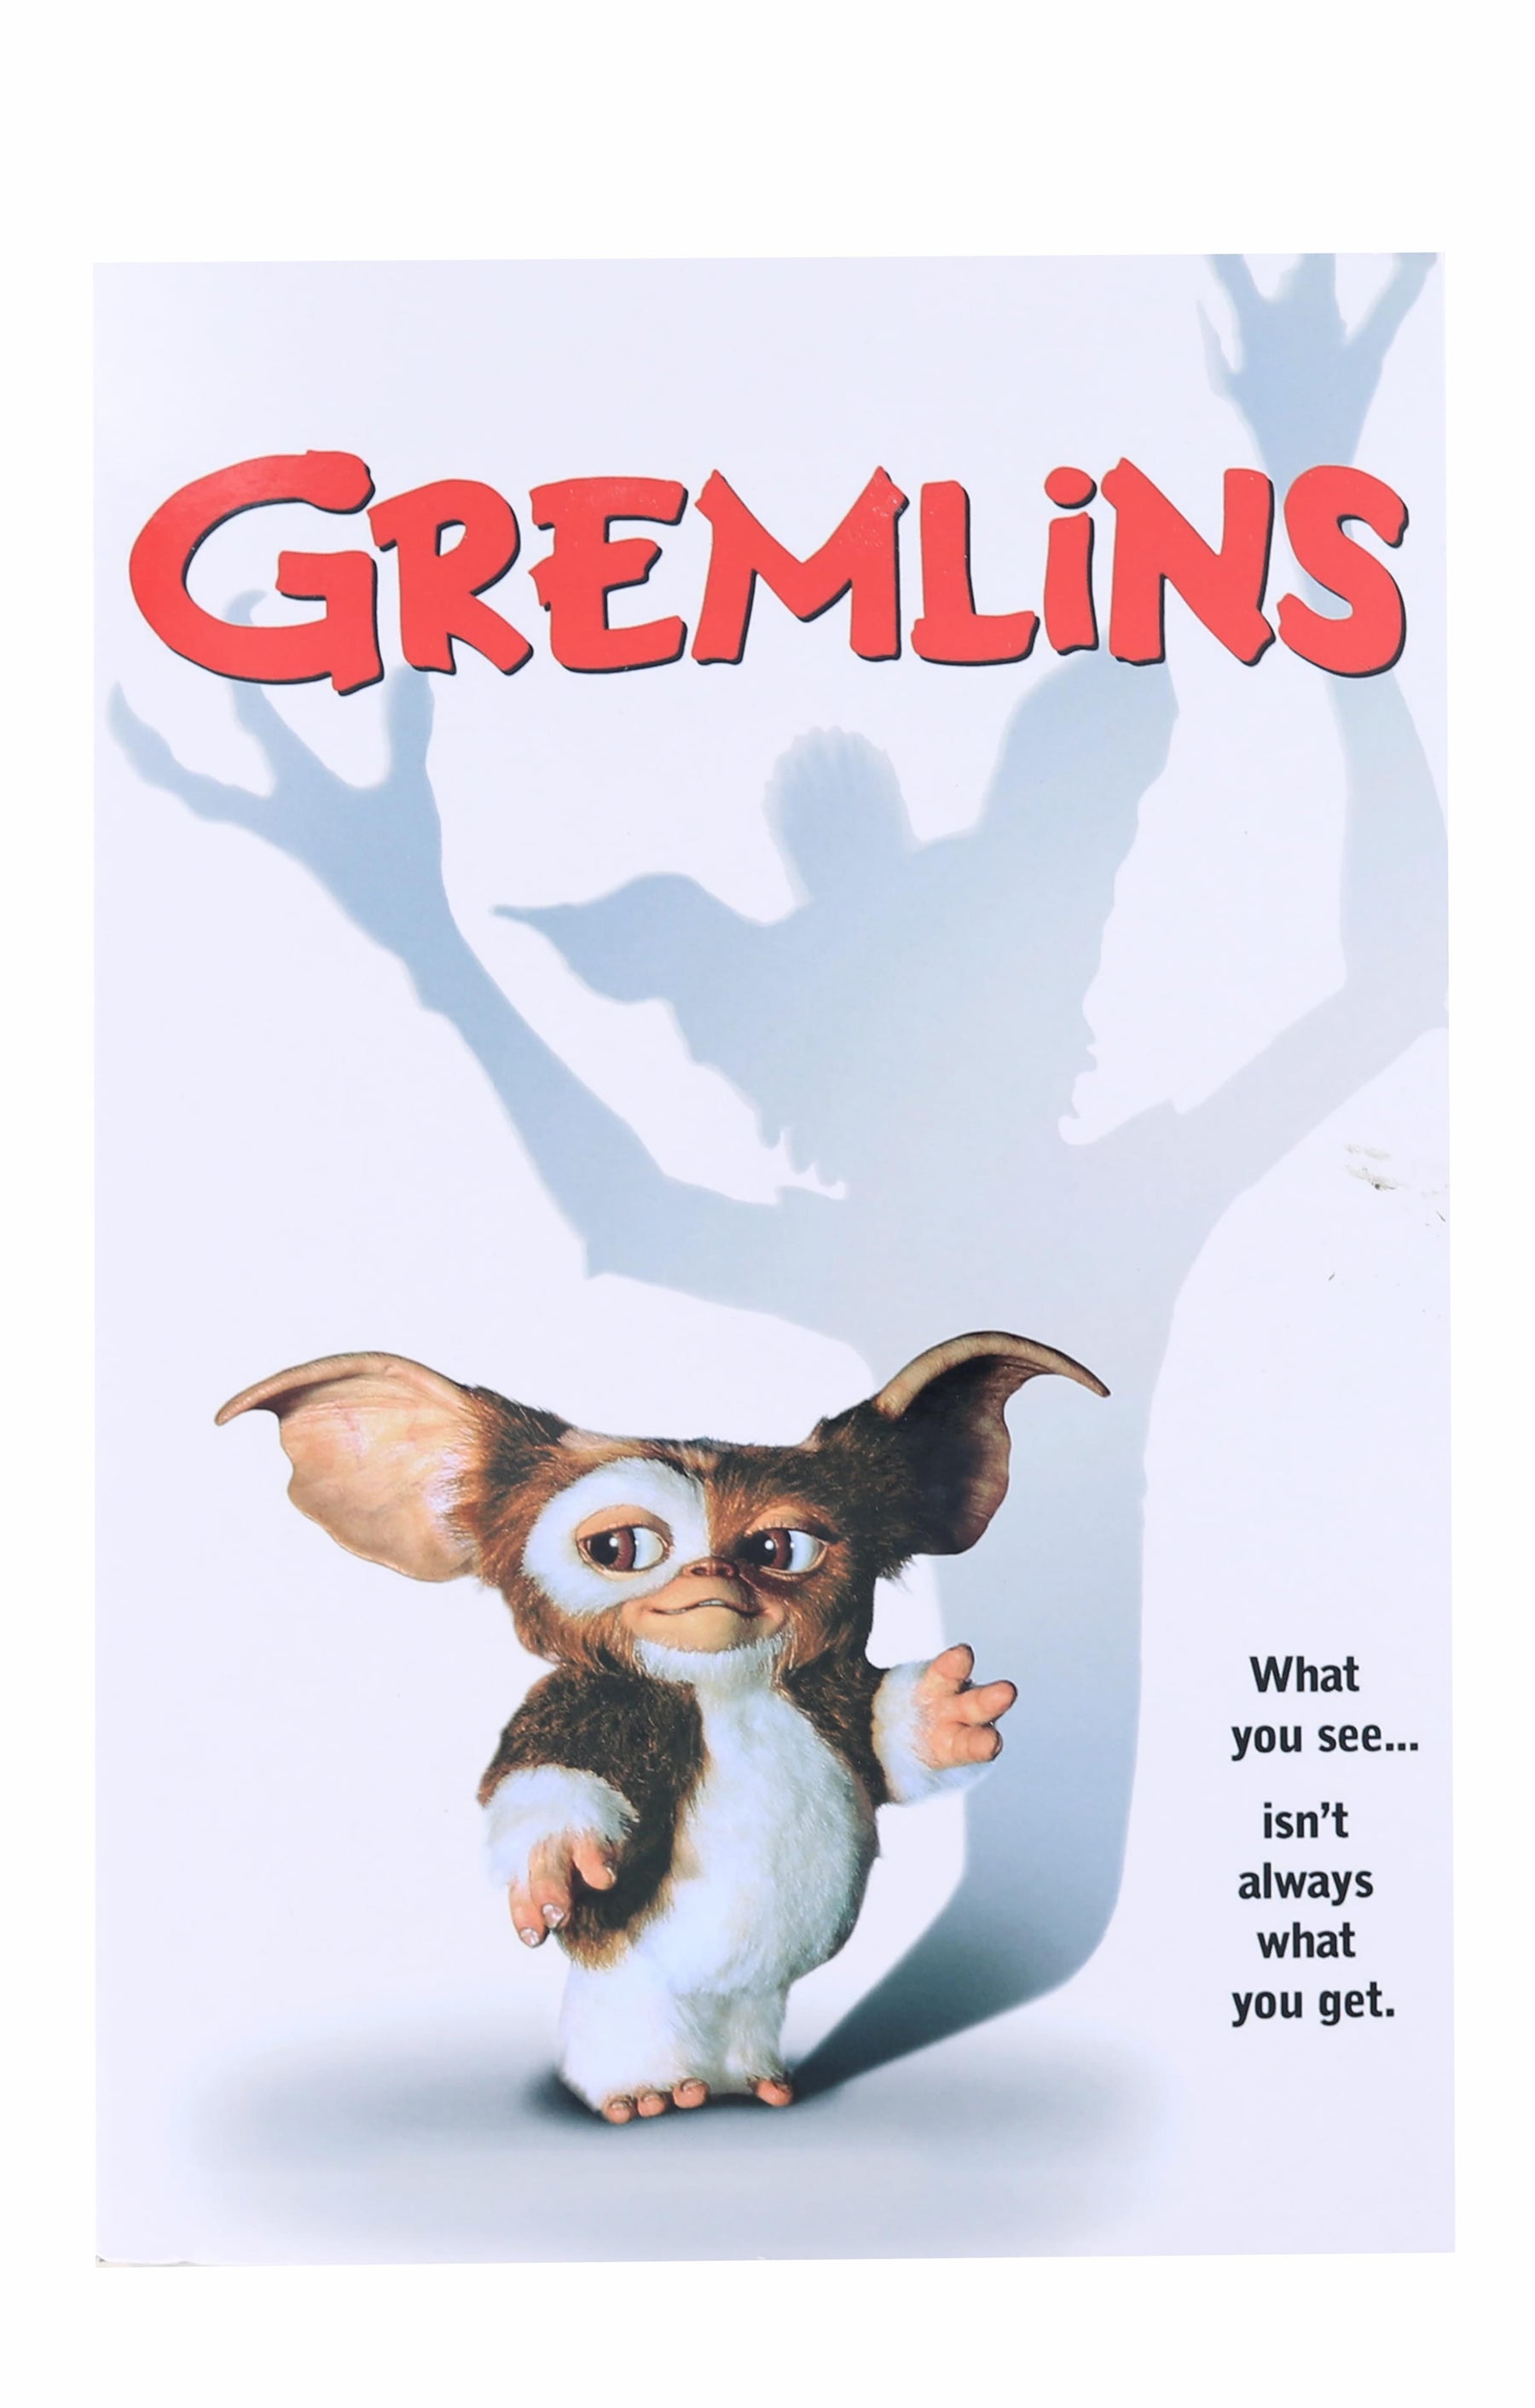 Gremlins 7 Inch Scale Action Figure | Ultimate Gizmo